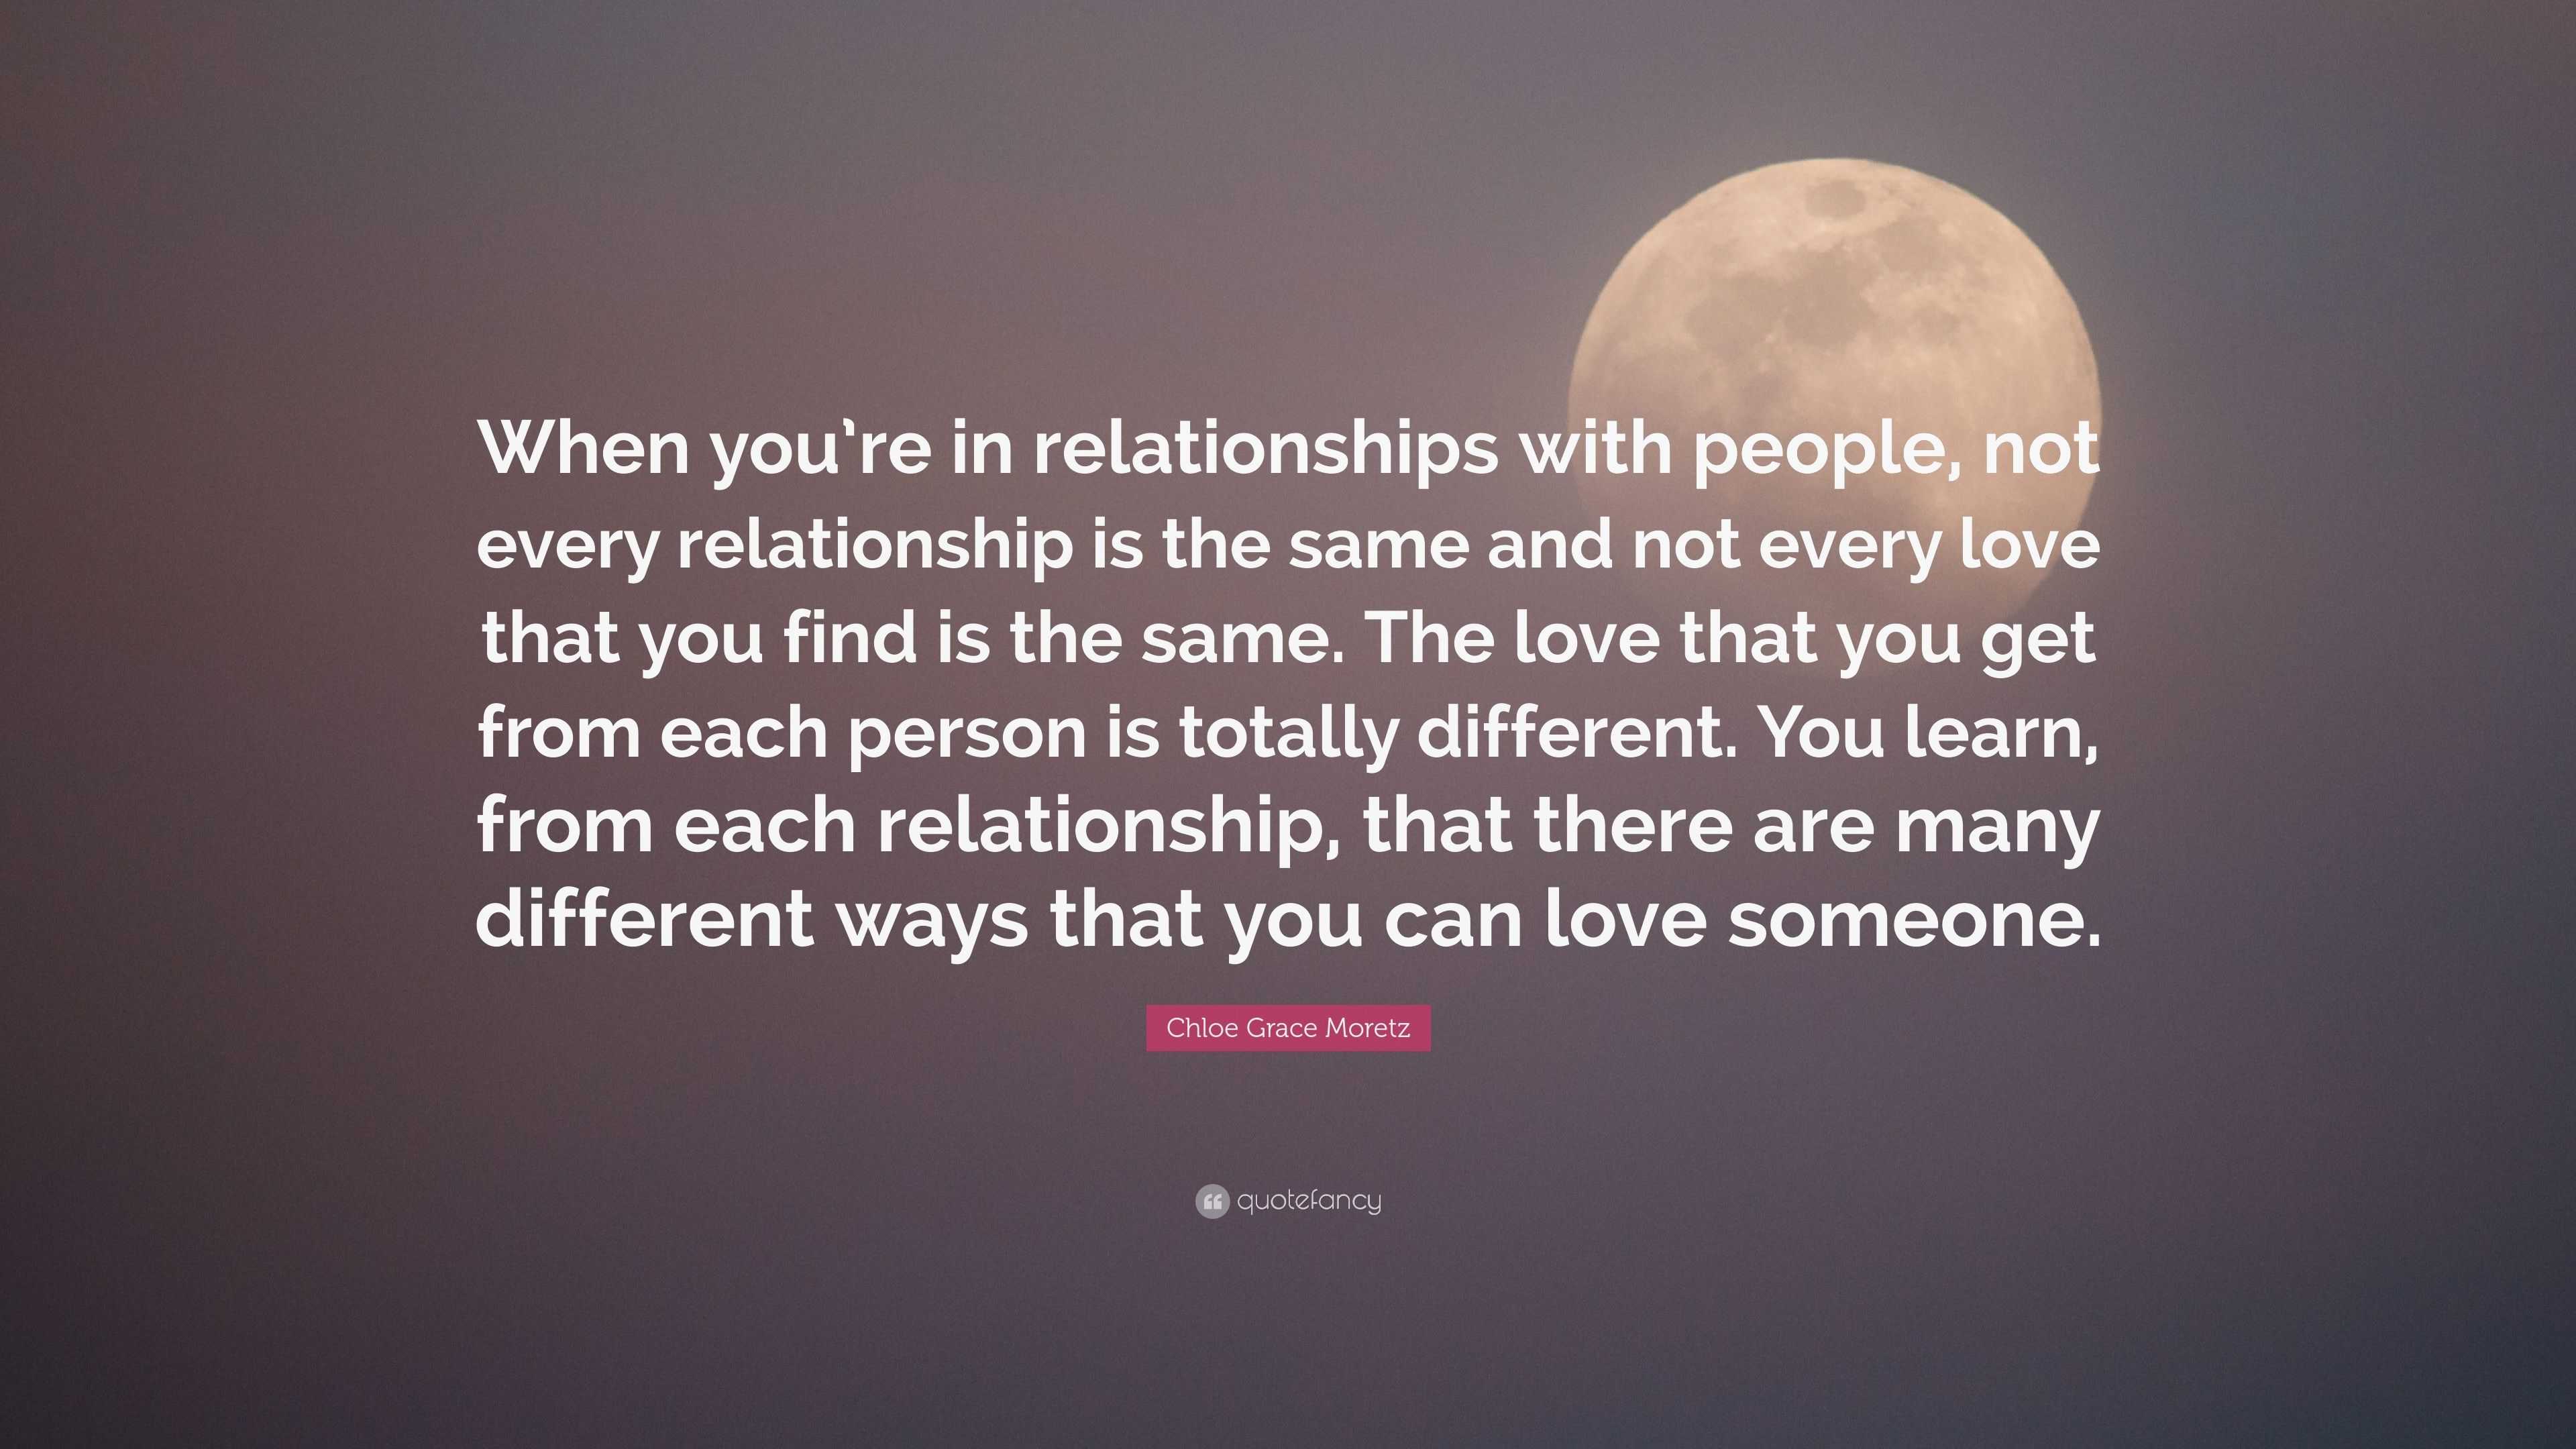 Chloe Grace Moretz Quote When You Re In Relationships With People Not Every Relationship Is The Same And Not Every Love That You Find Is The Sam